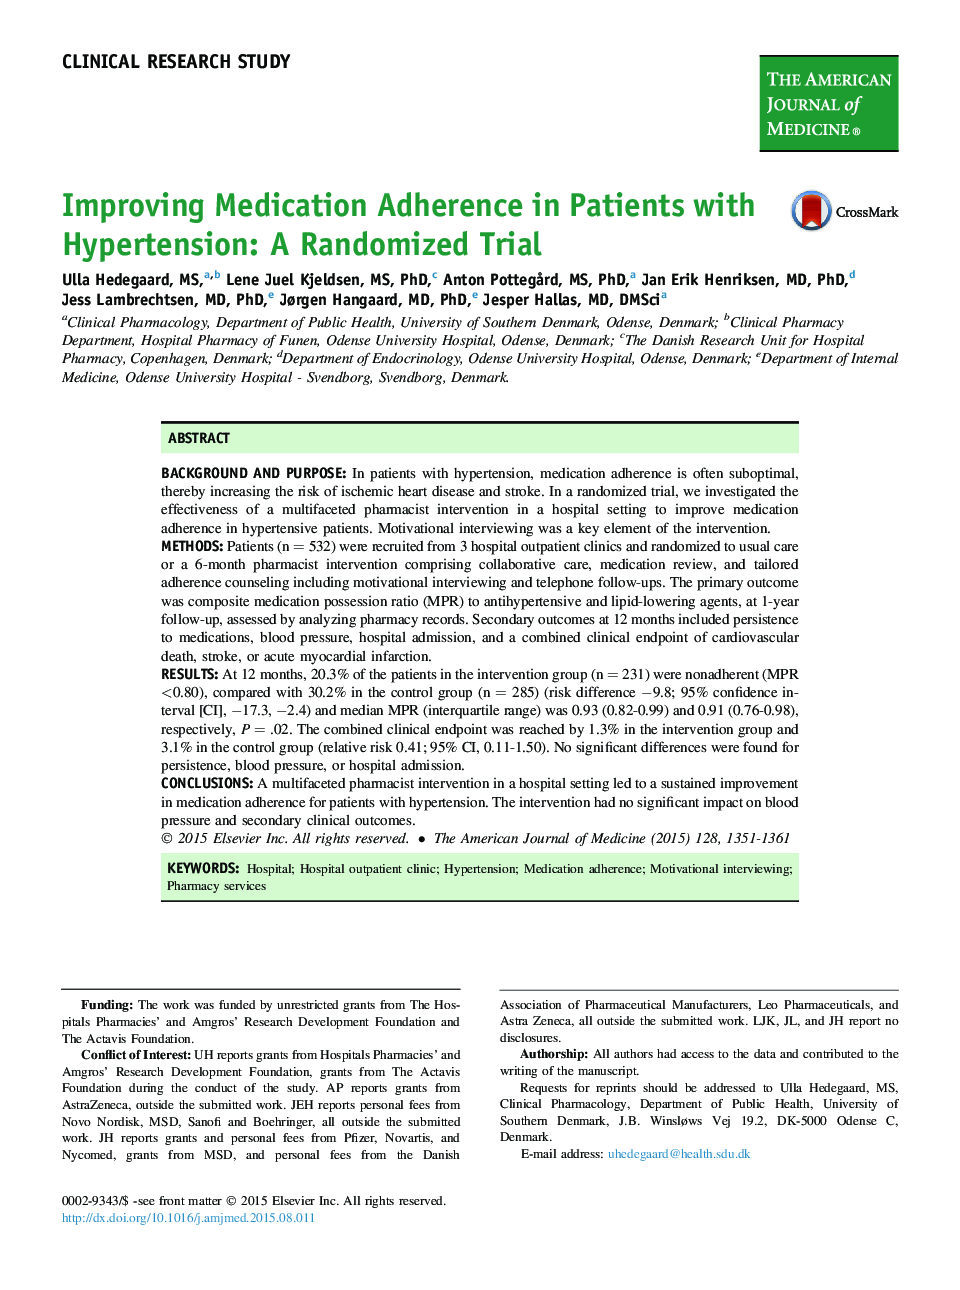 Improving Medication Adherence in Patients with Hypertension: A Randomized Trial 